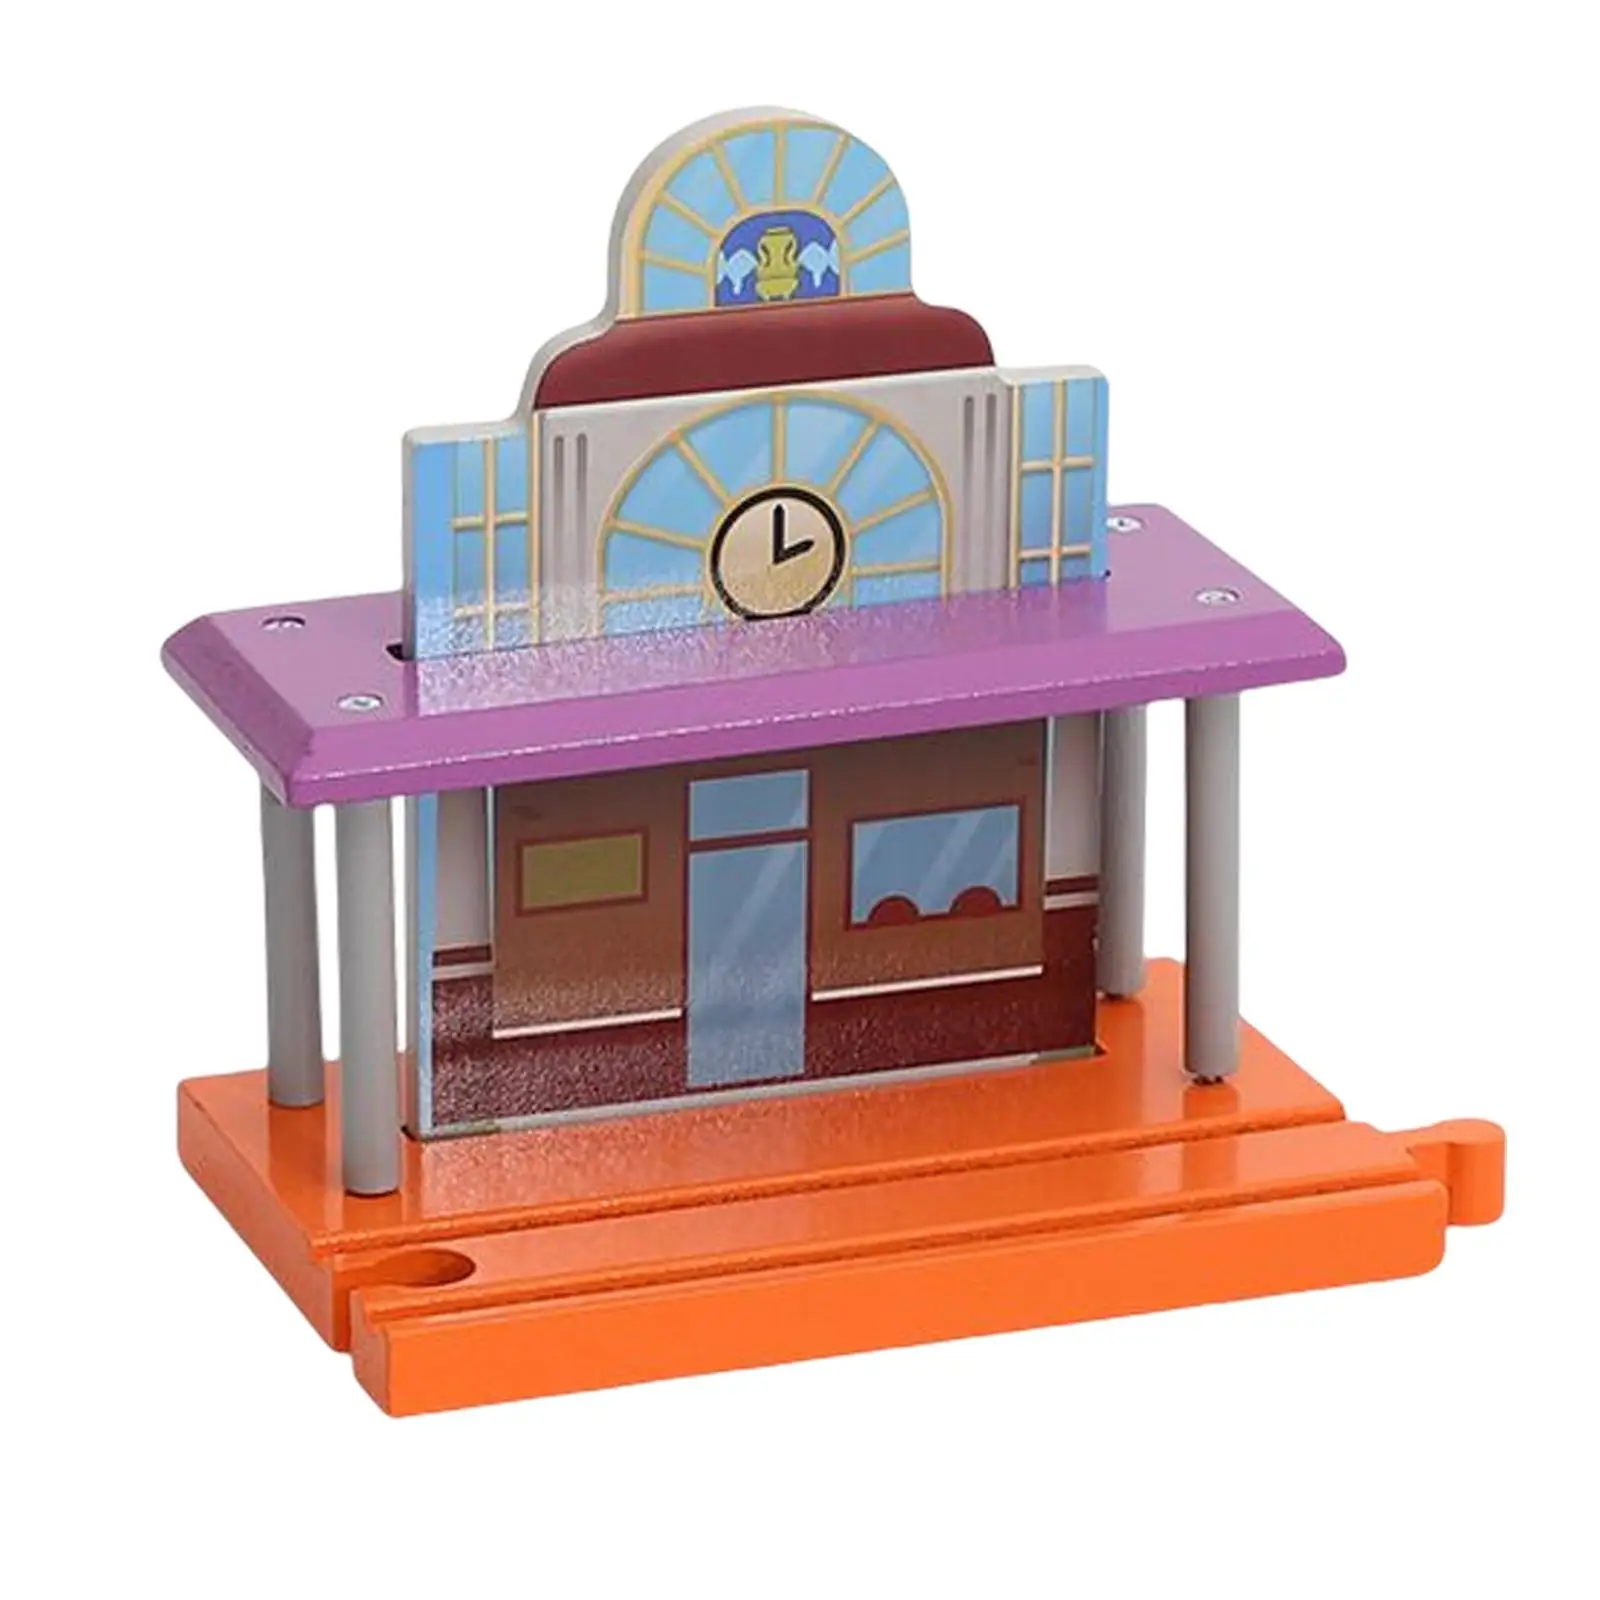 Rail Wooden Railway Station Train Scene Educational for New Year Gifts